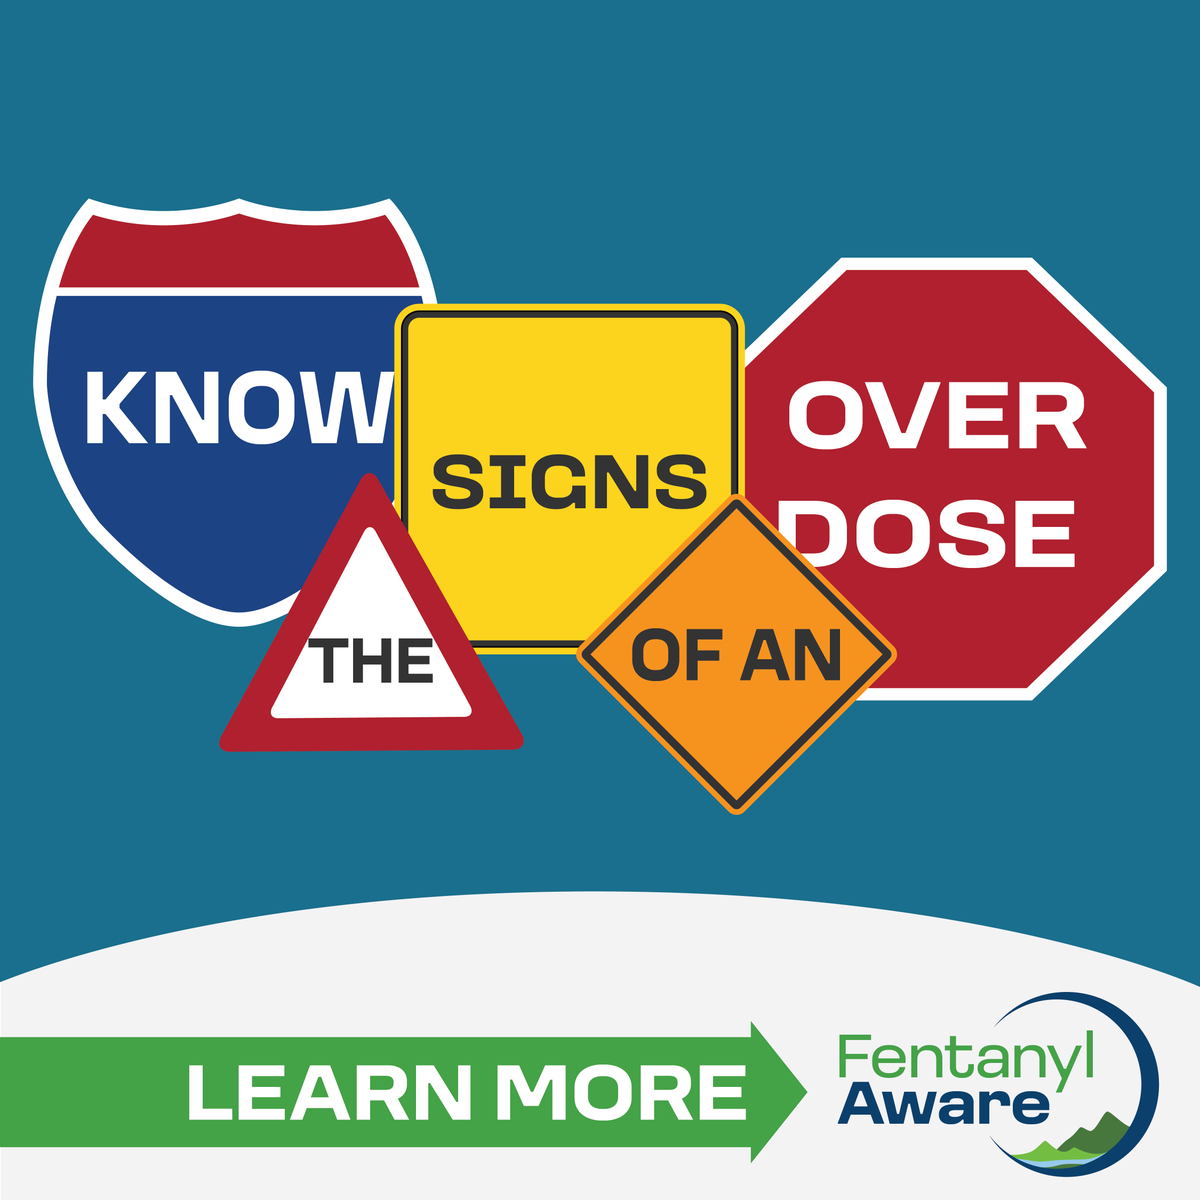 This week we are talking about the signs of a fentanyl overdose. Signs of an overdose is if someone is unresponsive, slowed or no breathing, heavy gurgling or snoring sounds, blue or gray skin, lips, or nails, Cold or clammy skin. Learn more at ow.ly/j73M50RNHQ2